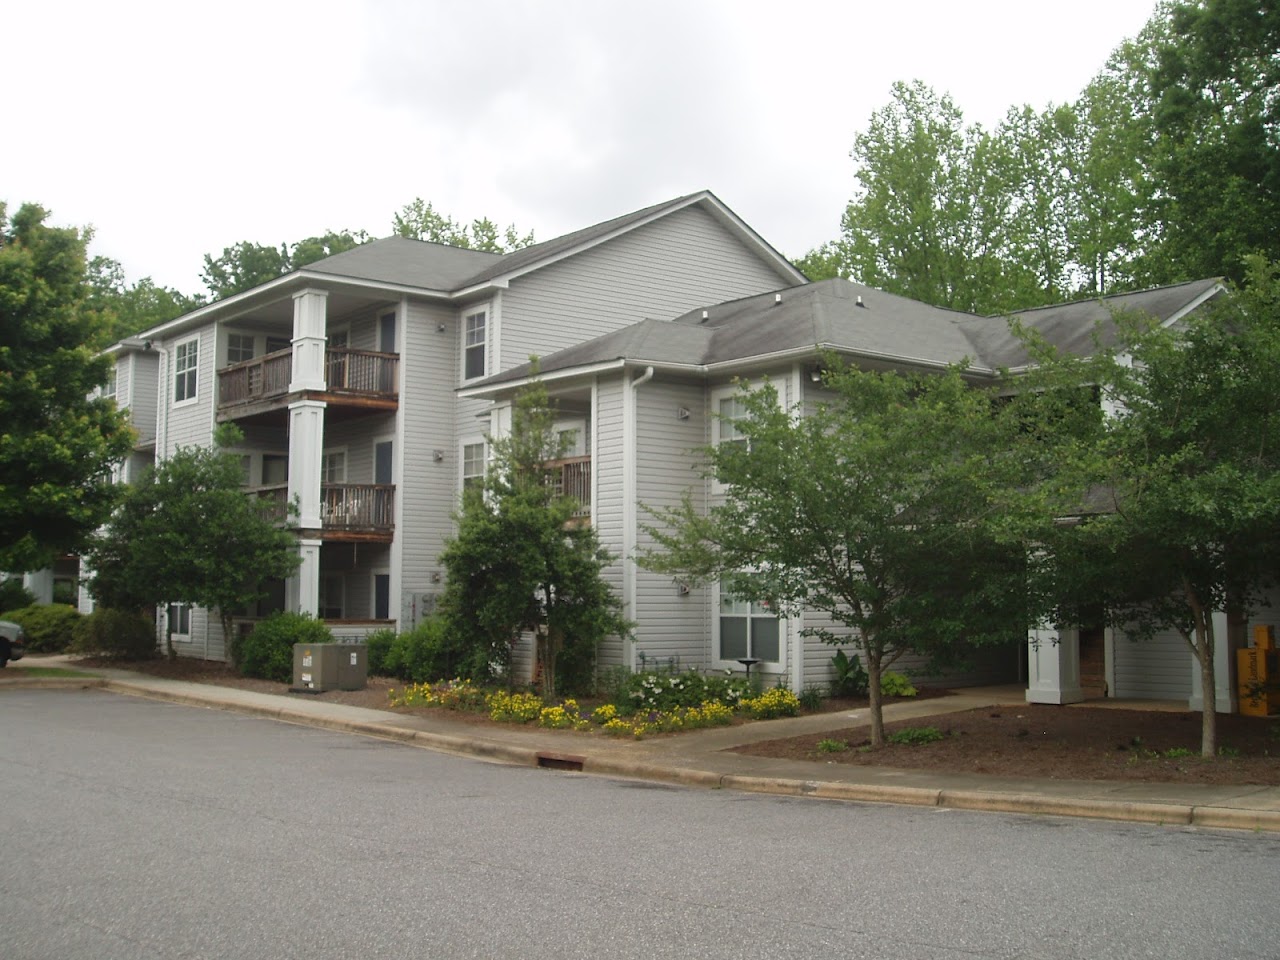 Photo of FOREST PARK GARDENS PHASE I at 1321 FOREST PARK TERRACE STATESVILLE, NC 28677